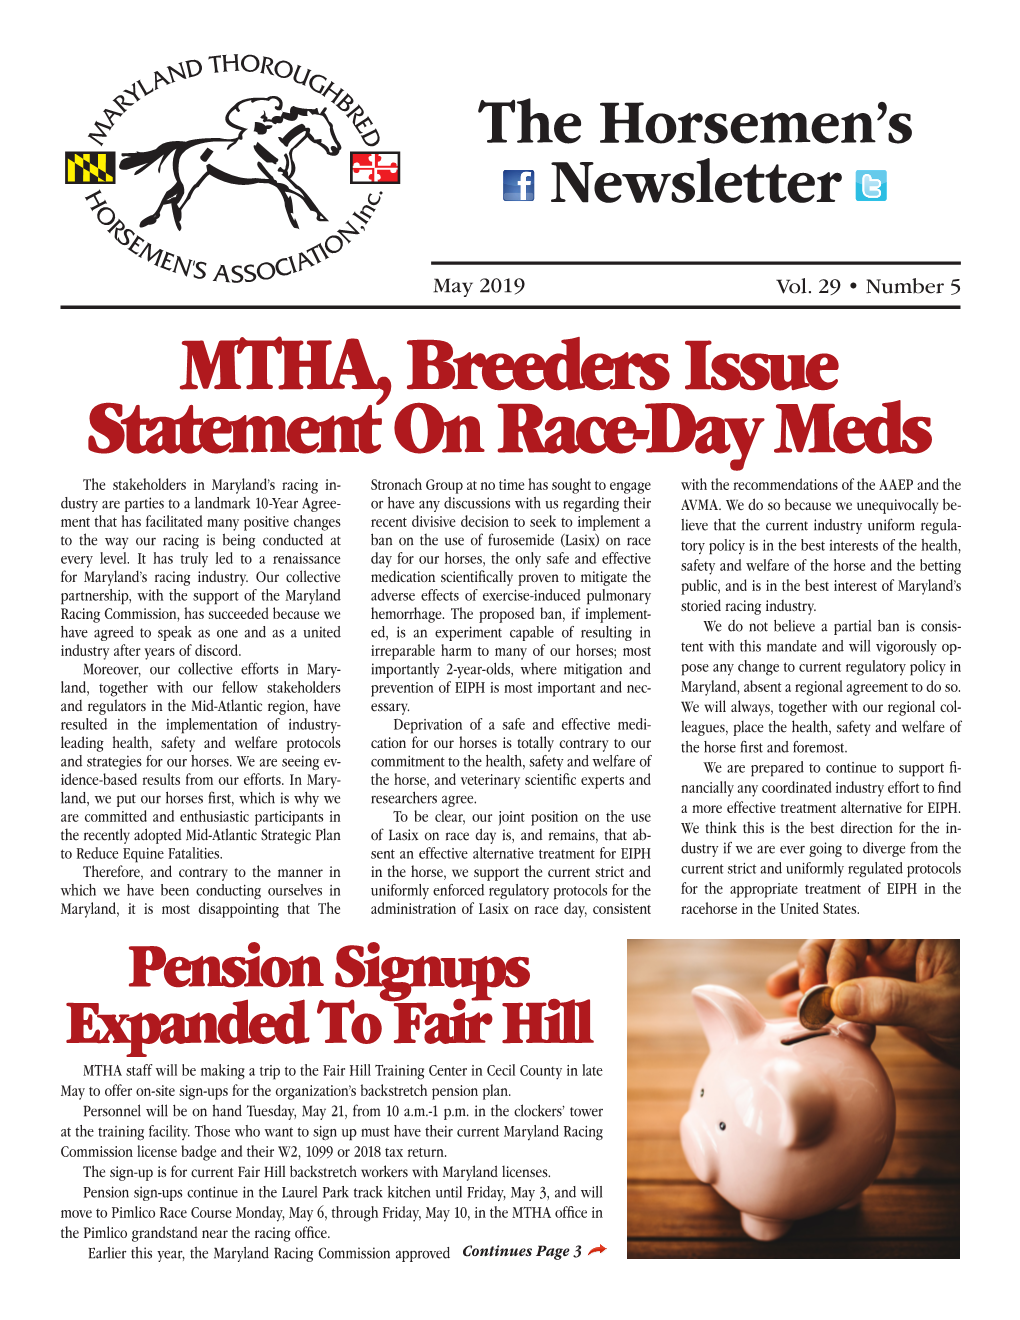 MTHA, Breeders Issue Statement on Race-Day Meds